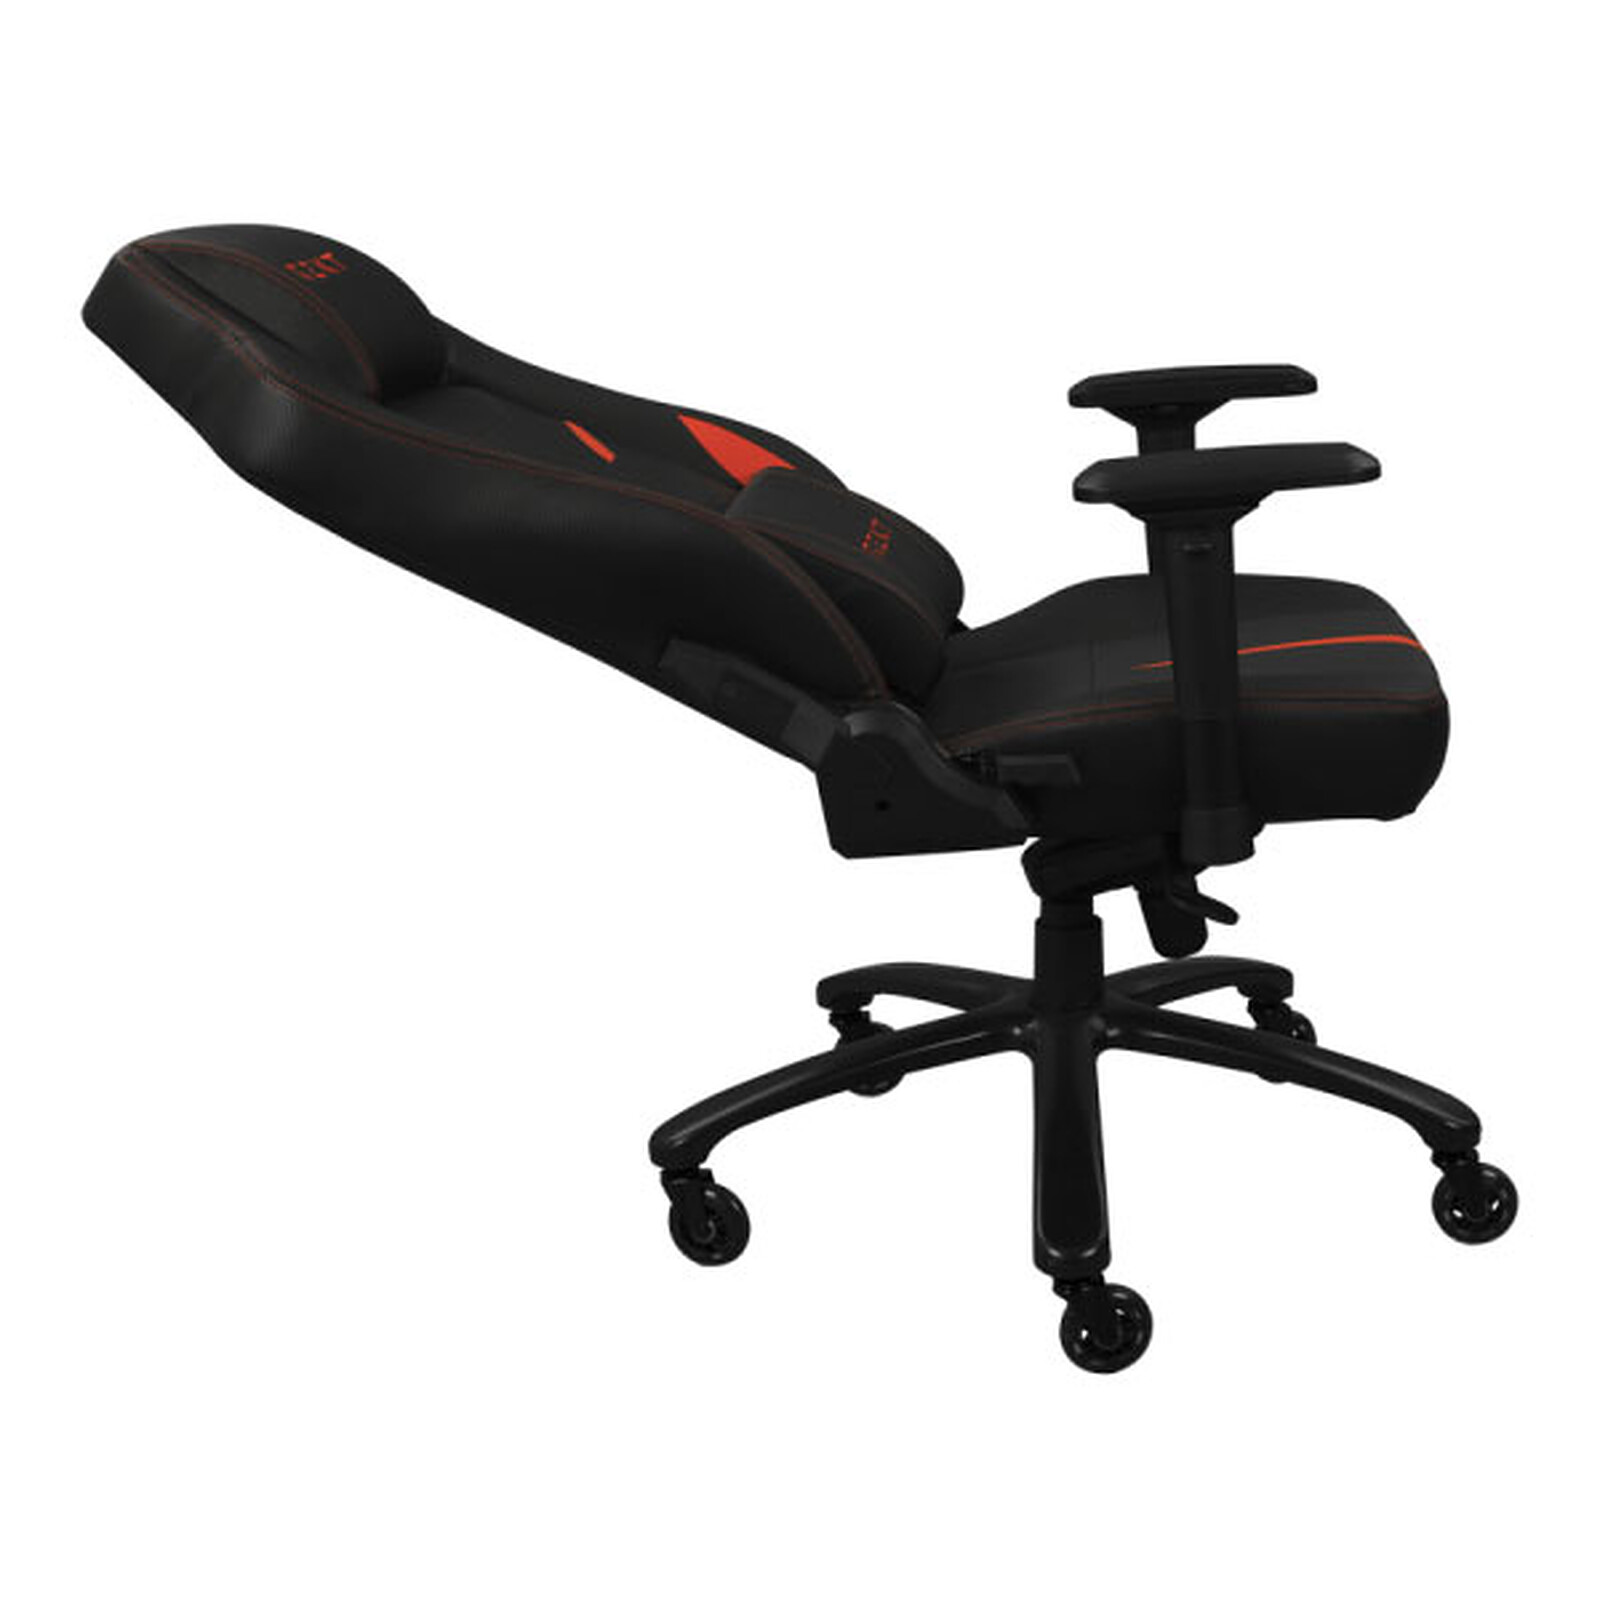 REKT TEAM8 Max (Red) - Gaming chair - LDLC 3-year warranty | Holy Moley